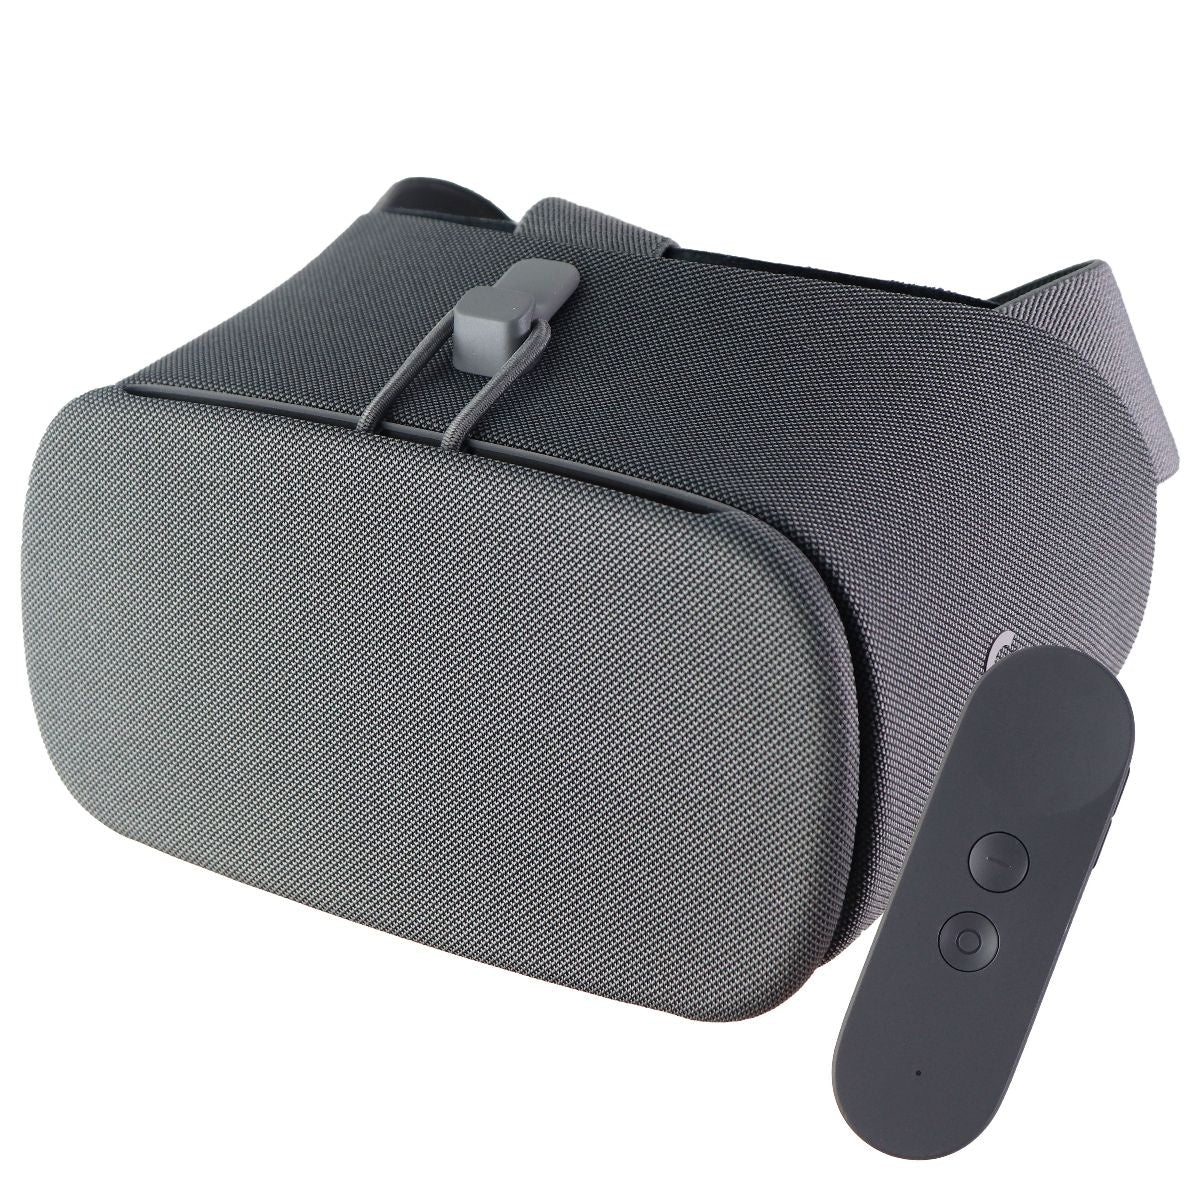 Google Daydream View Virtual Reality Headset - Charcoal (GA00219-CA) Virtual Reality - Smartphone VR Headsets Google    - Simple Cell Bulk Wholesale Pricing - USA Seller